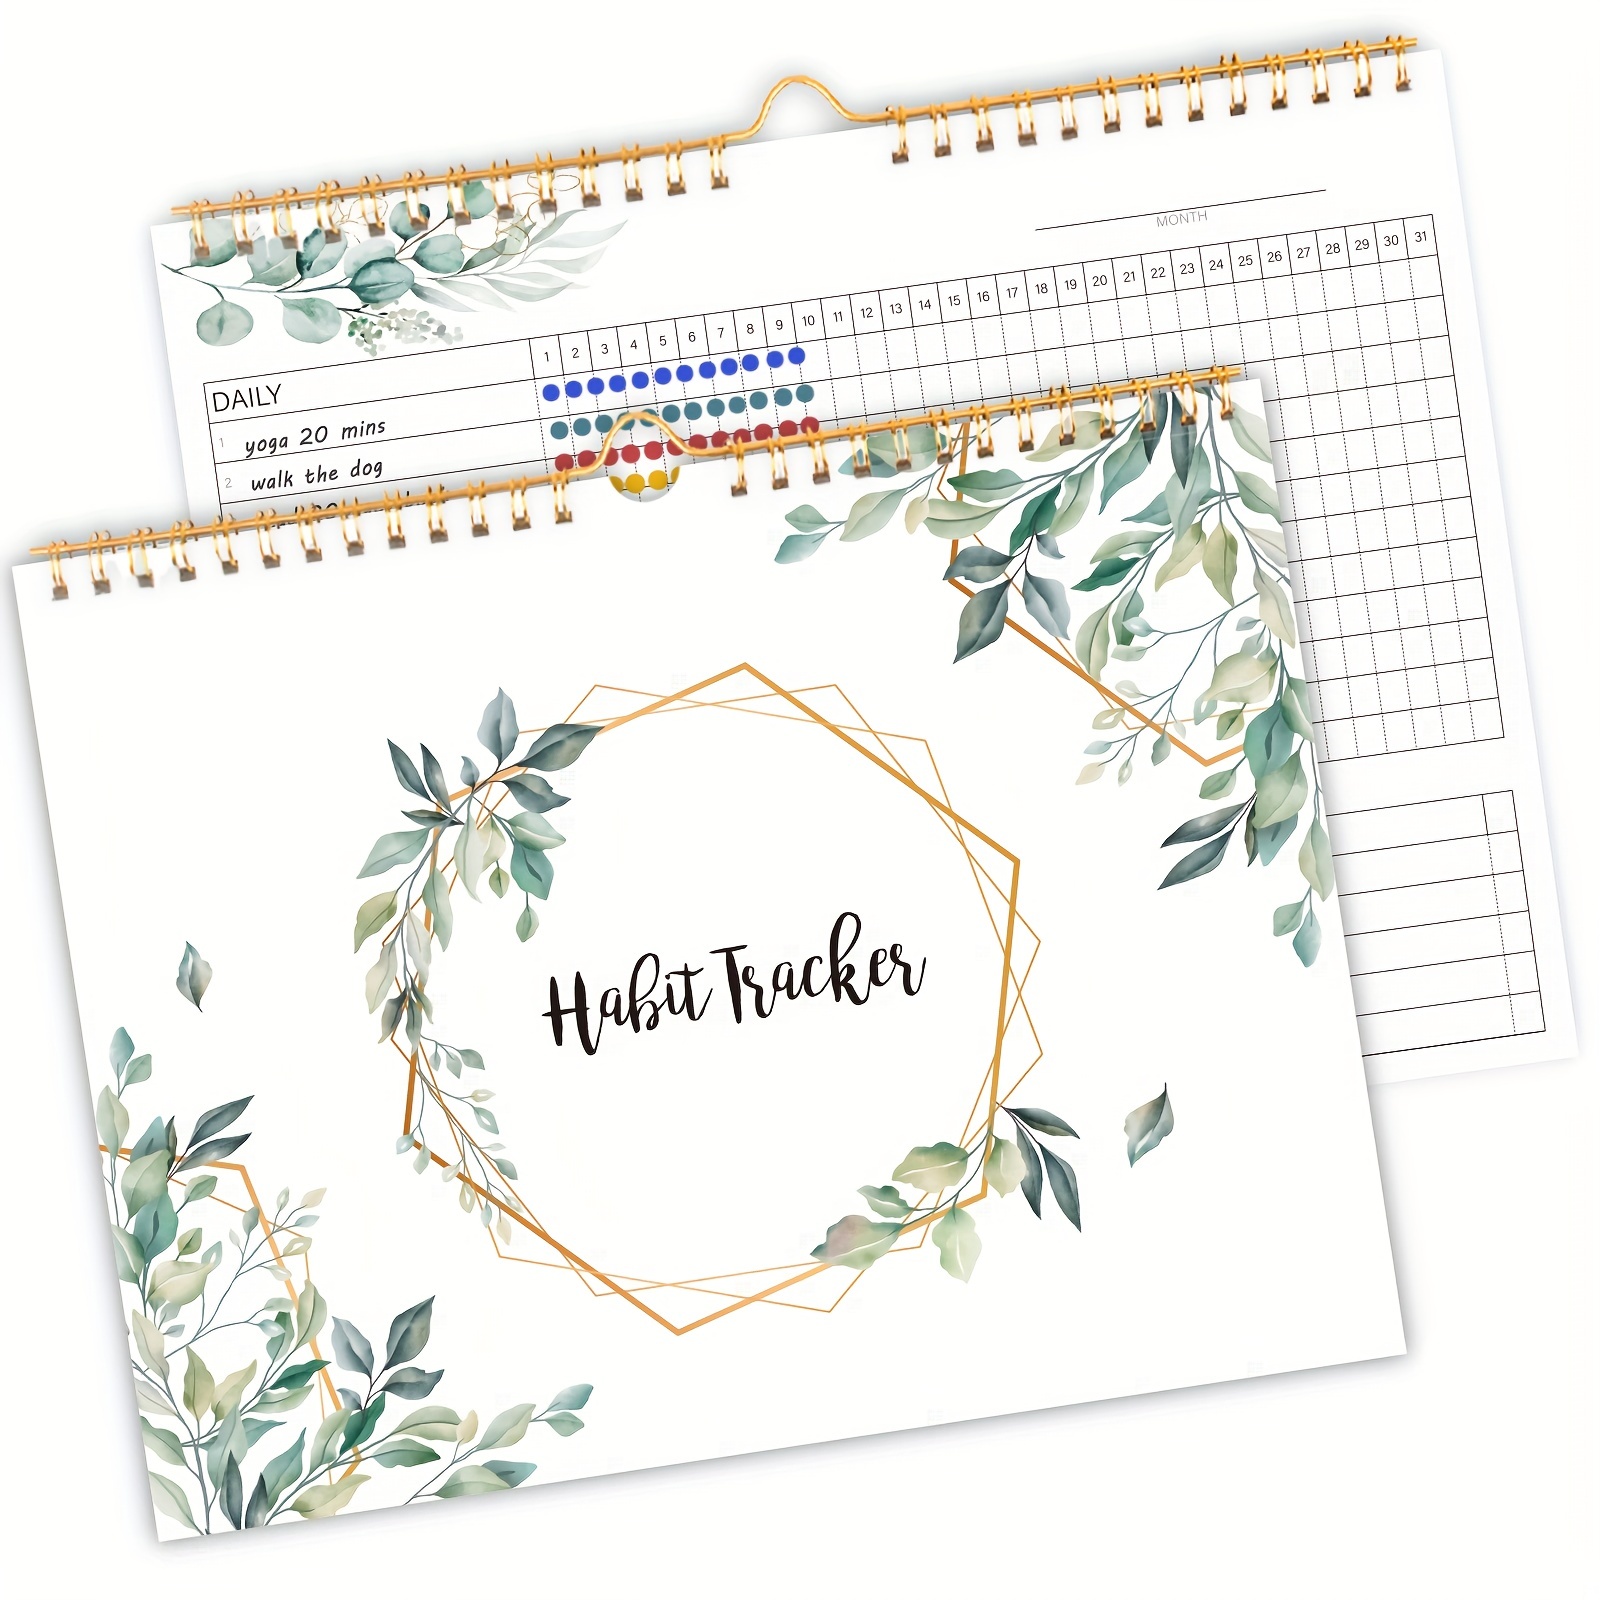 TREES 1 Pc Habit Tracker Calendar Spiral Binding Habit Journal With 12  Different Plant Pages, Undated Daily Weekly Monthly Habit Tracker To Boost  Prod